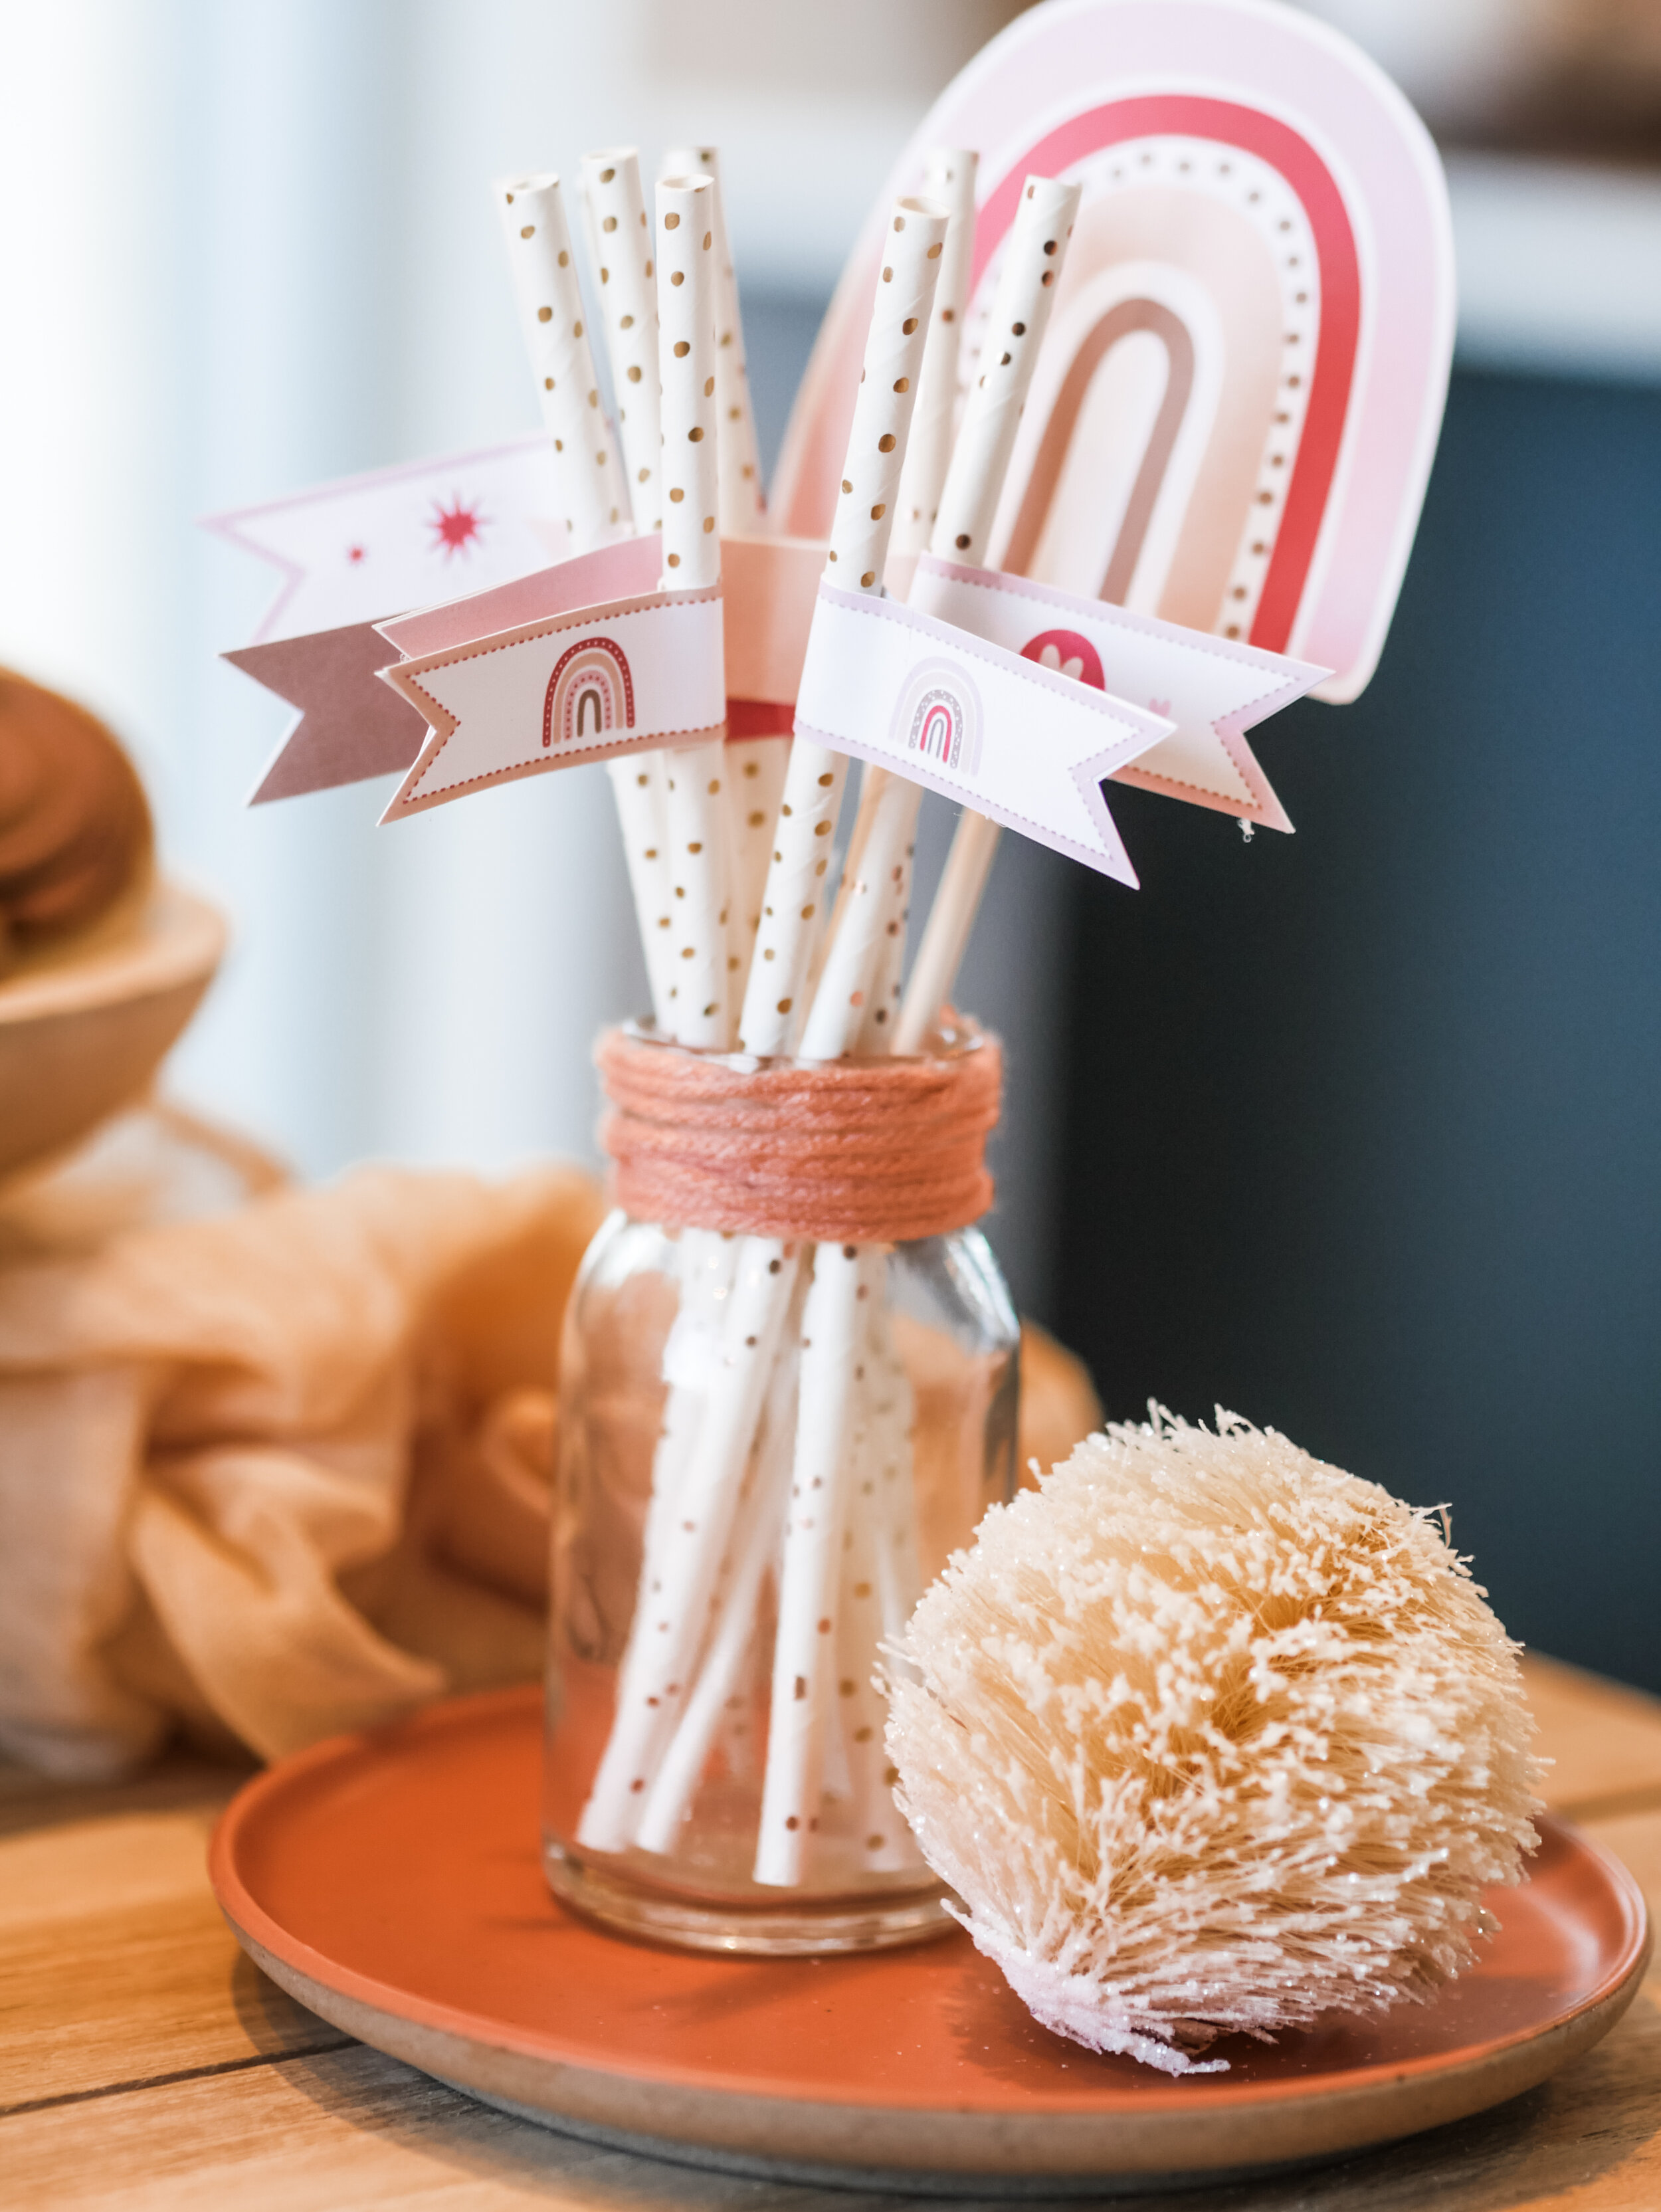 Muted Rainbow Straw Flags - great for a first birthday party or shower! Get details and tons more party inspiration now at minteventdesign.com.